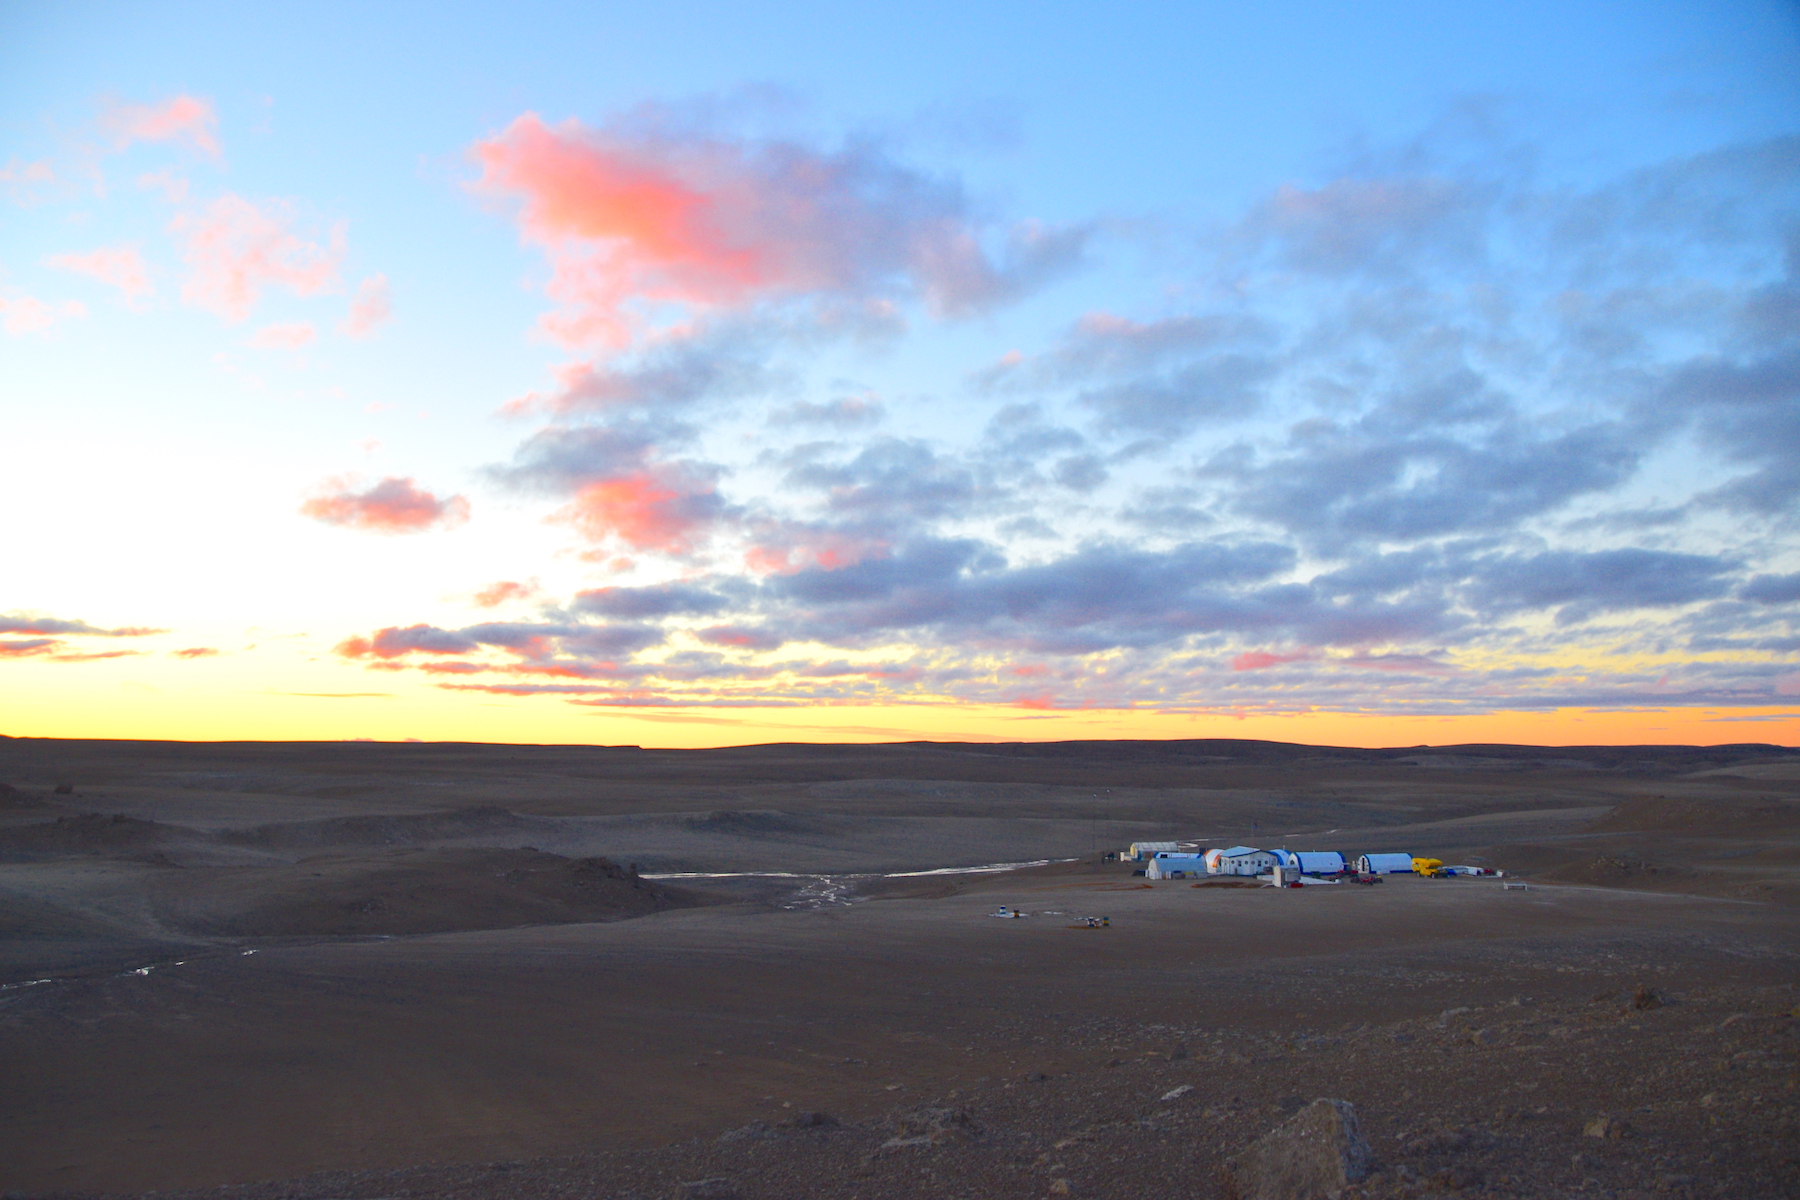 The sun sets over the HMP basecamp at 11 p.m.